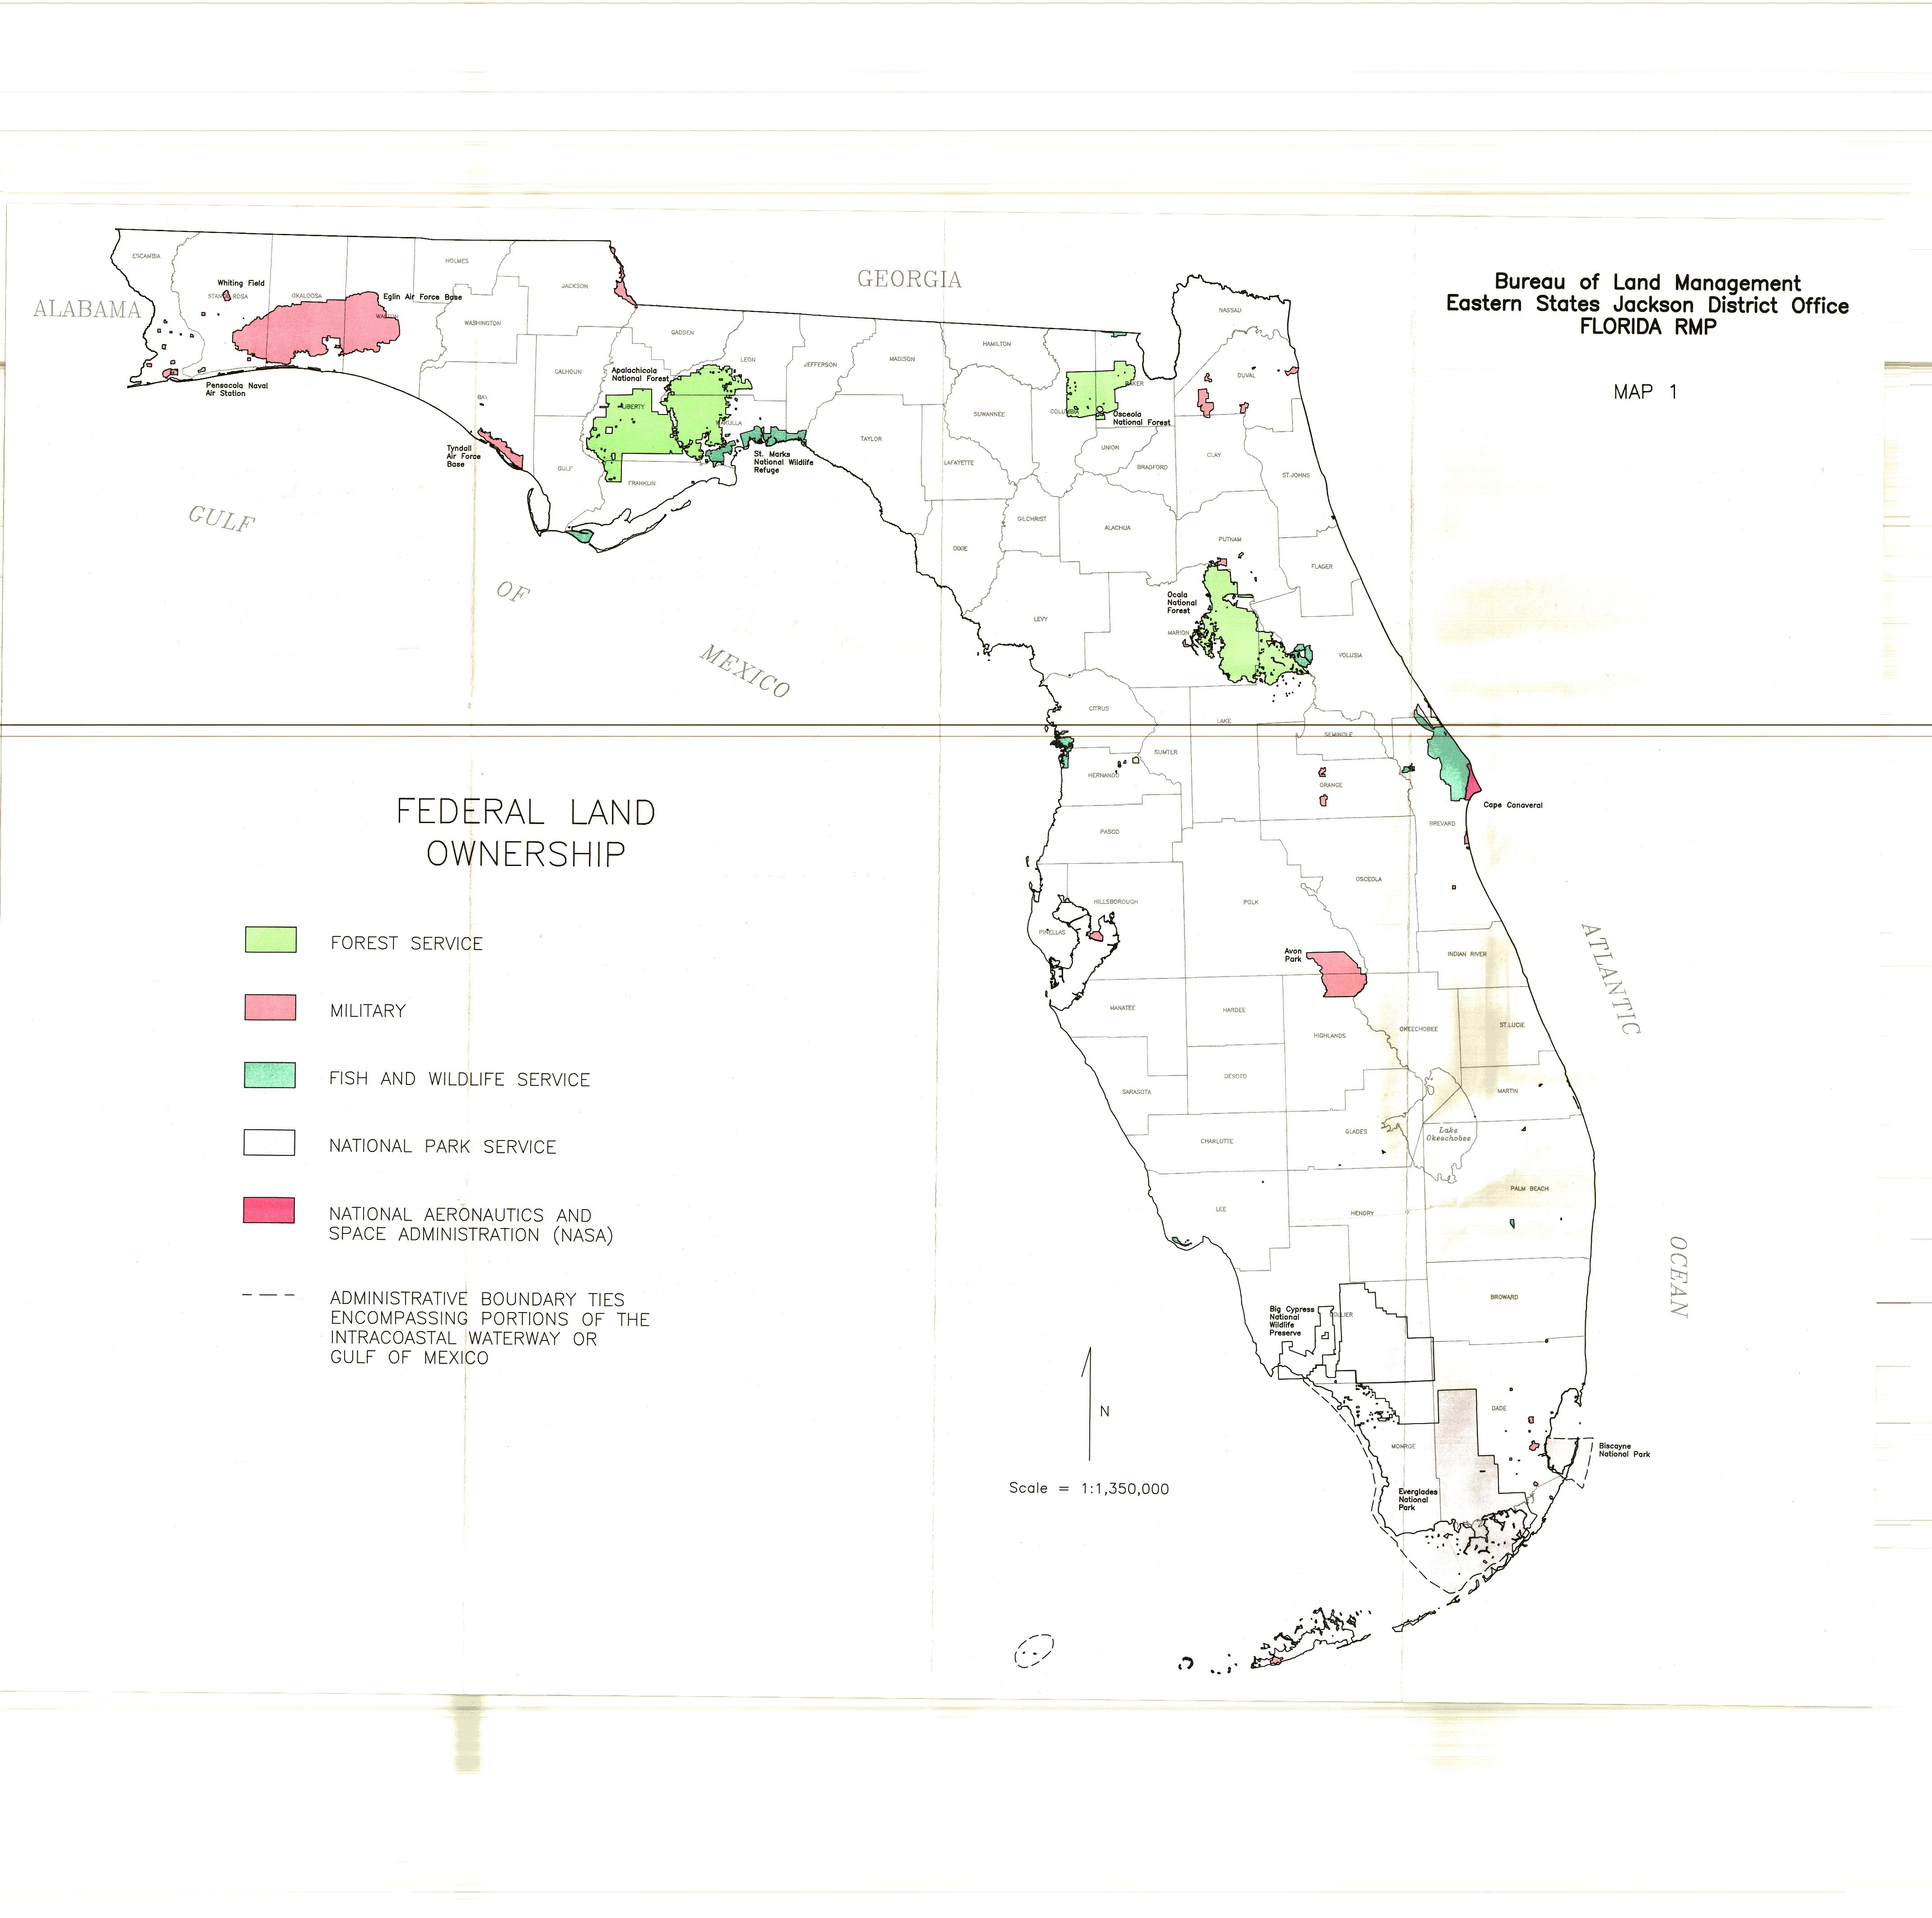 Eplanning 2.0 Front Office - Blm Land Florida Map